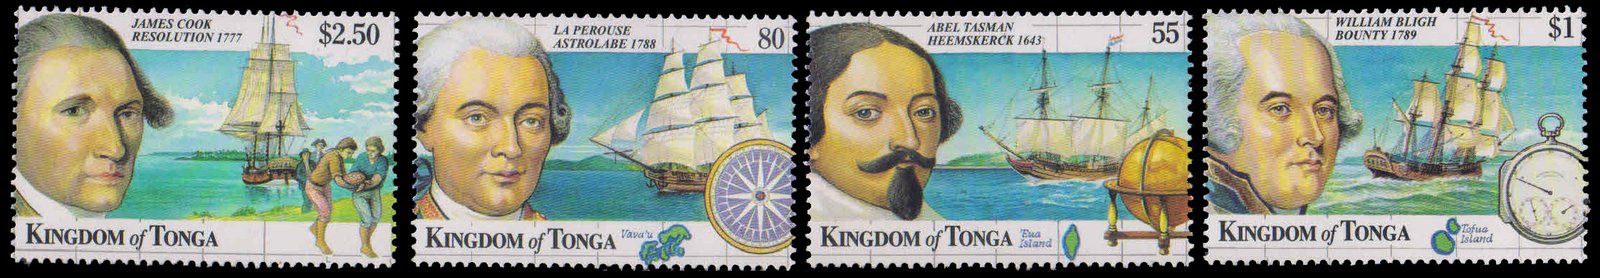 TONGA 1999-Early Explorers-Bounty, Cook, Ship, Set of 4 Stamps, MNH, S.G. 1448-51-Cat � 13-